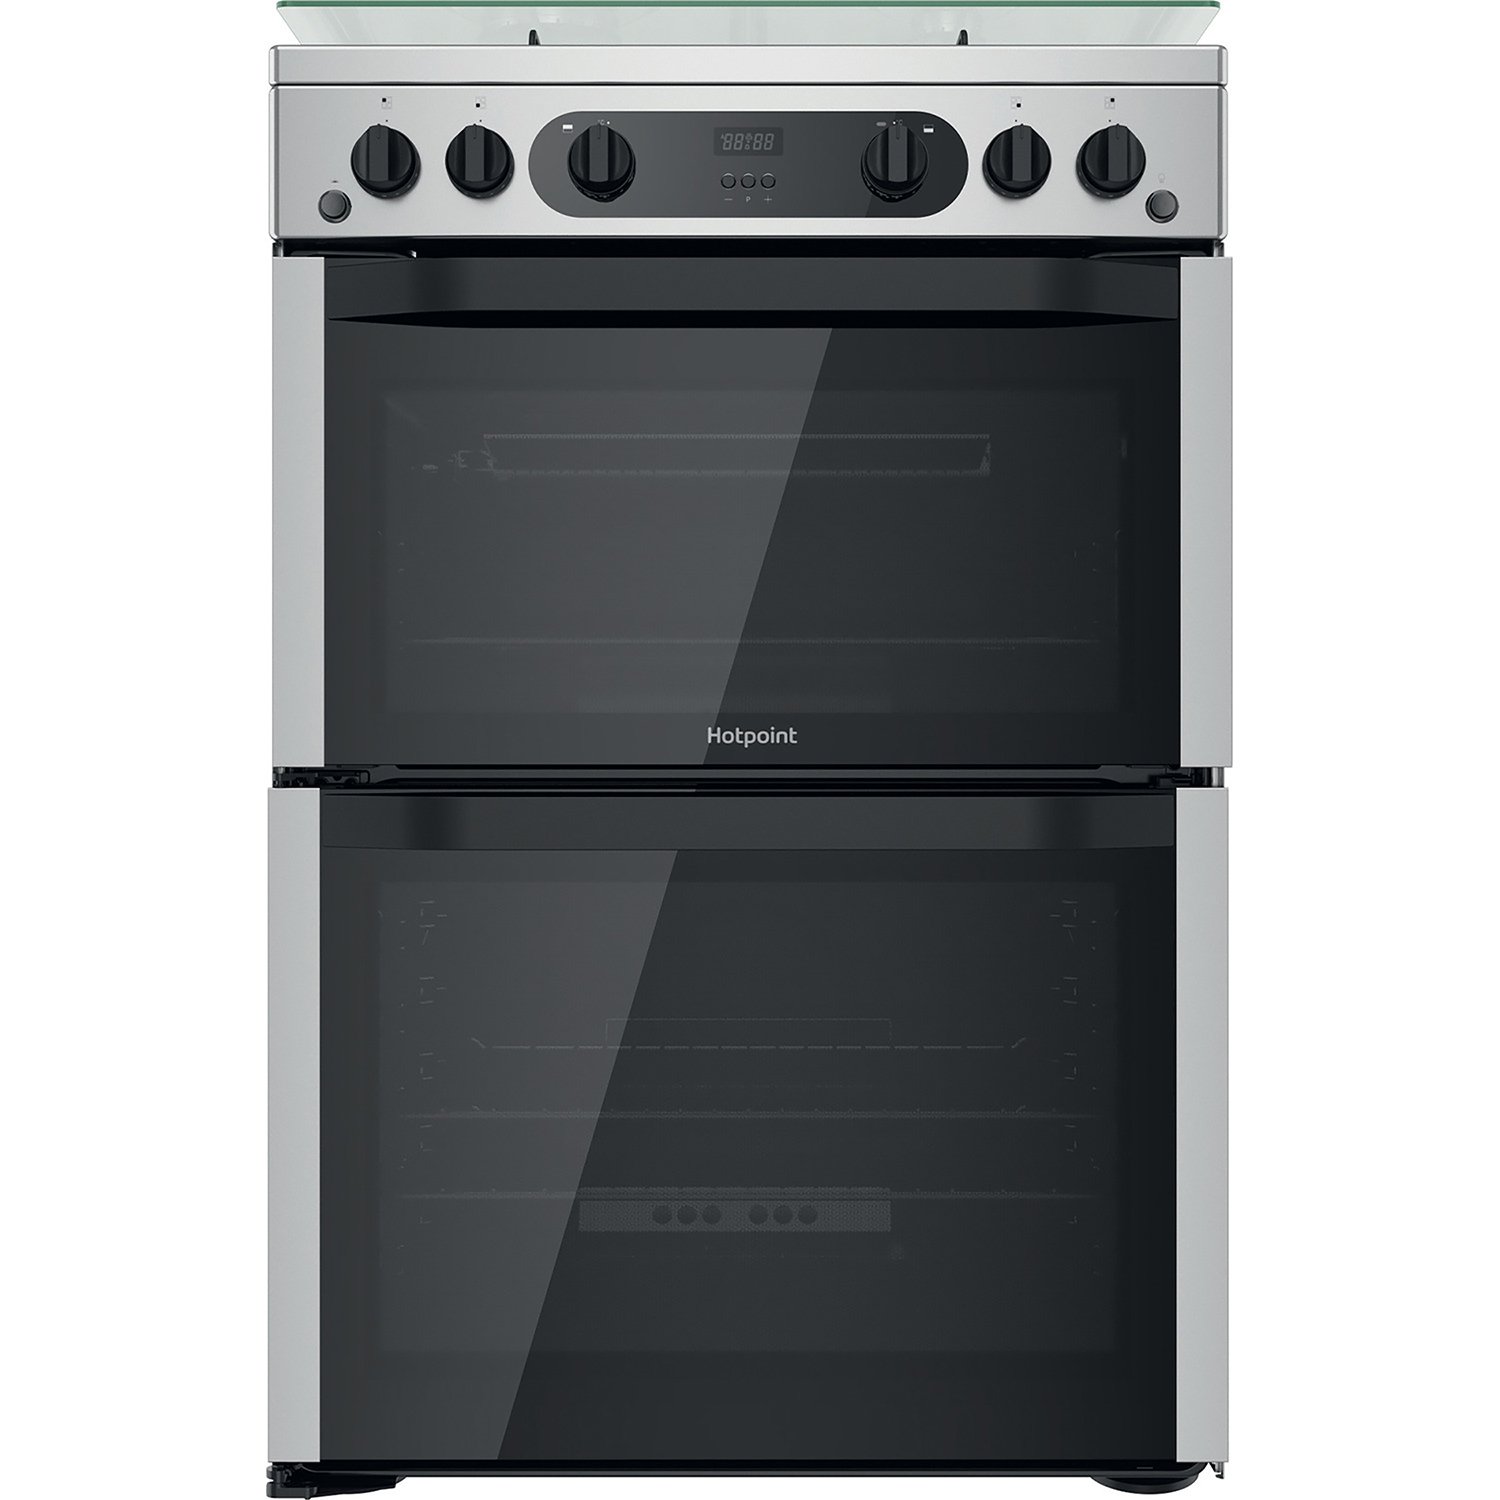 Hotpoint HDM67G0CCX/UK 60cm Double Oven Gas Cooker - S/Steel